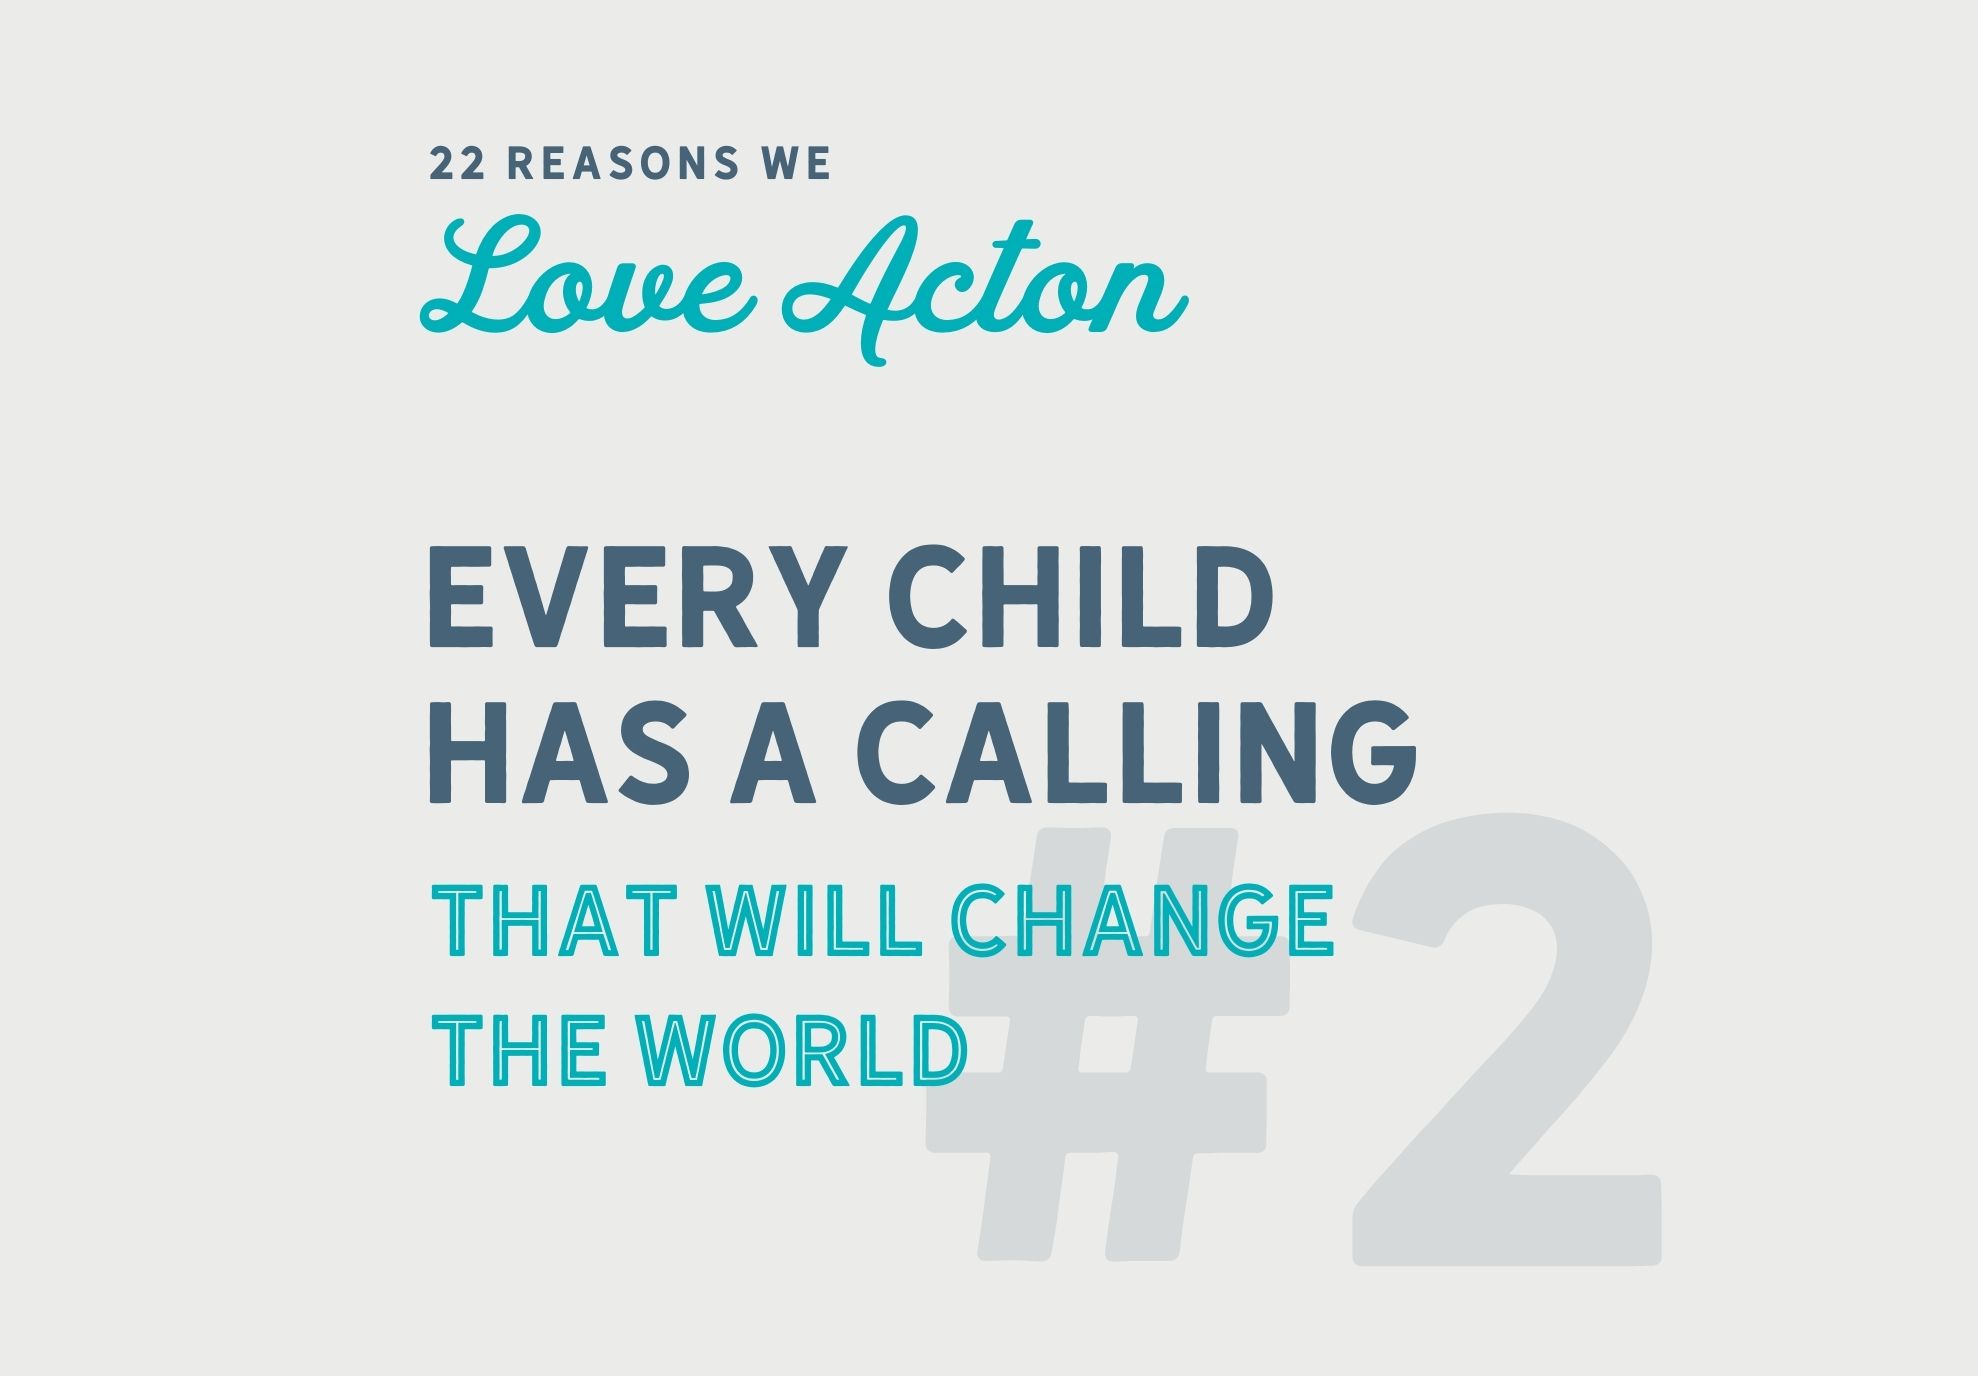 22 Reasons to Love Acton: Every Child Has a Calling